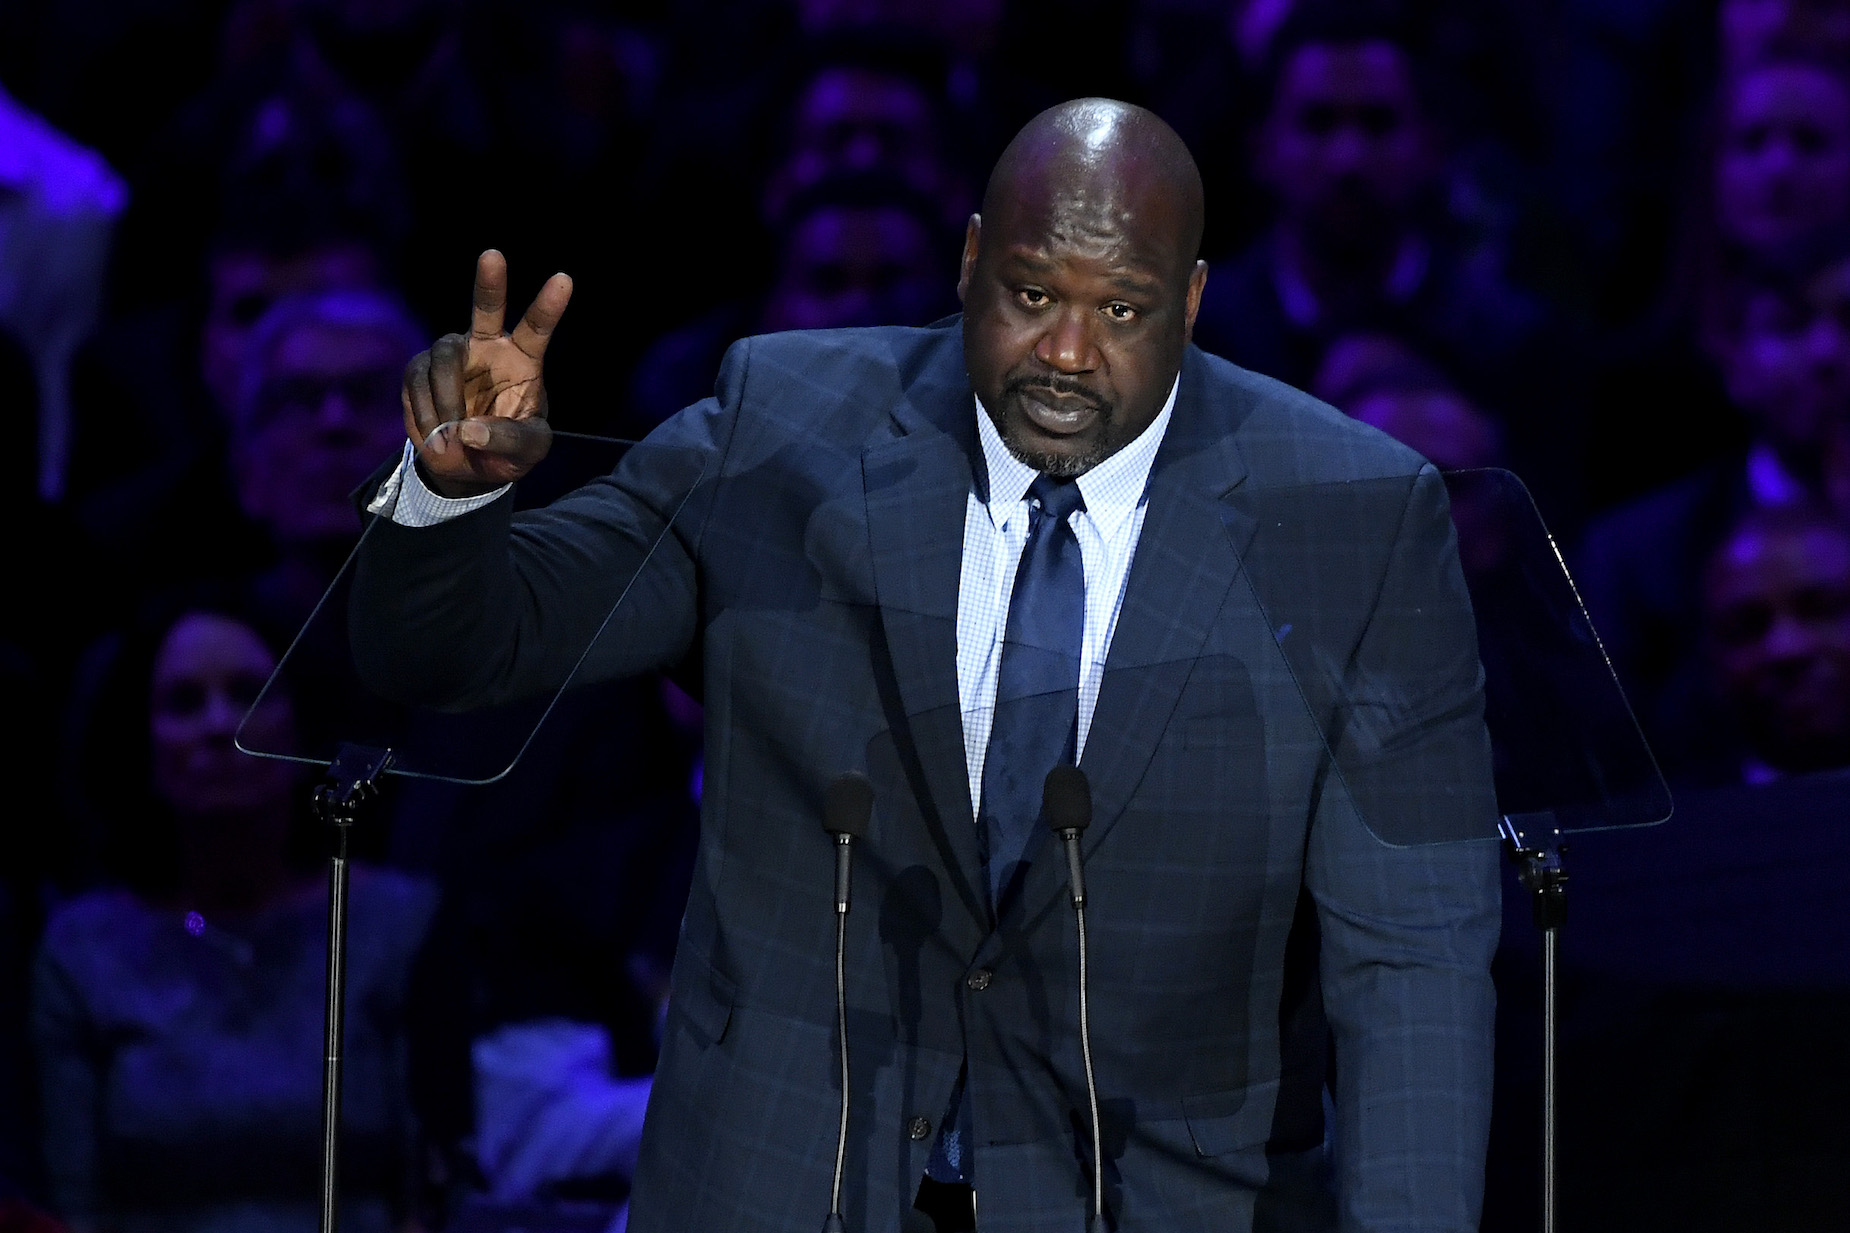 While 2020 was a tough year for Shaquille O'Neal, he still learned an important lesson.